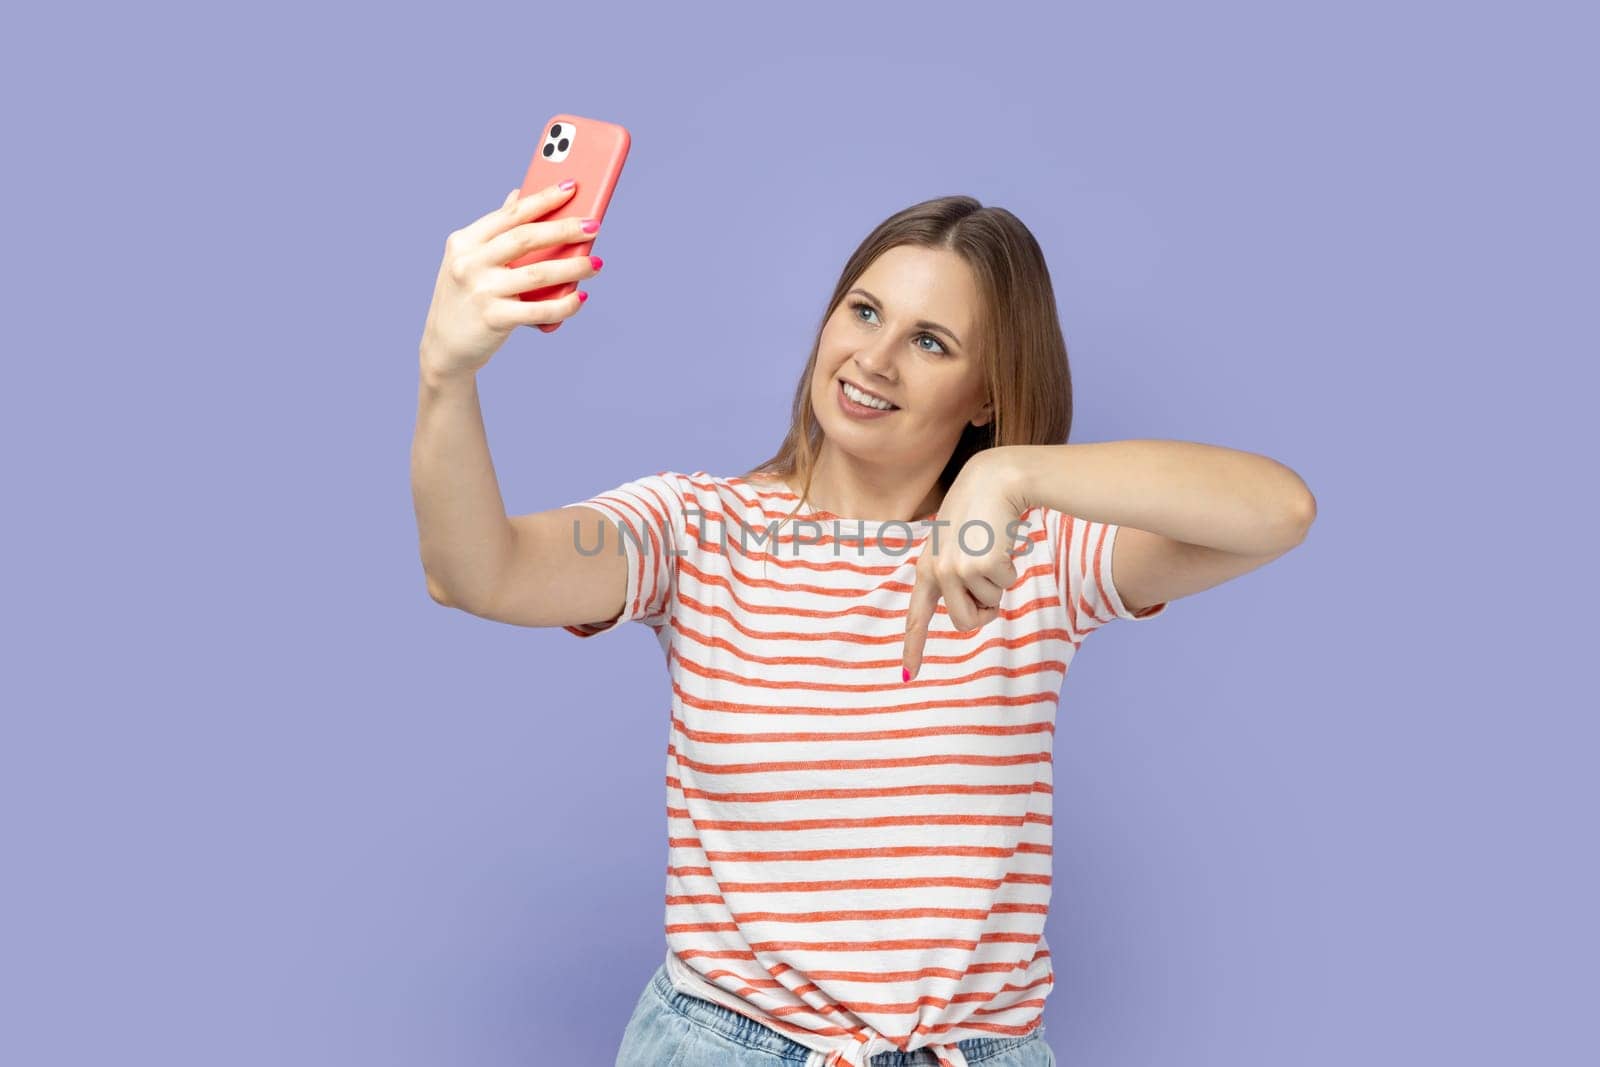 Woman standing with mobile phone and broadcasting livestream, pointing down, asking to subscribe. by Khosro1